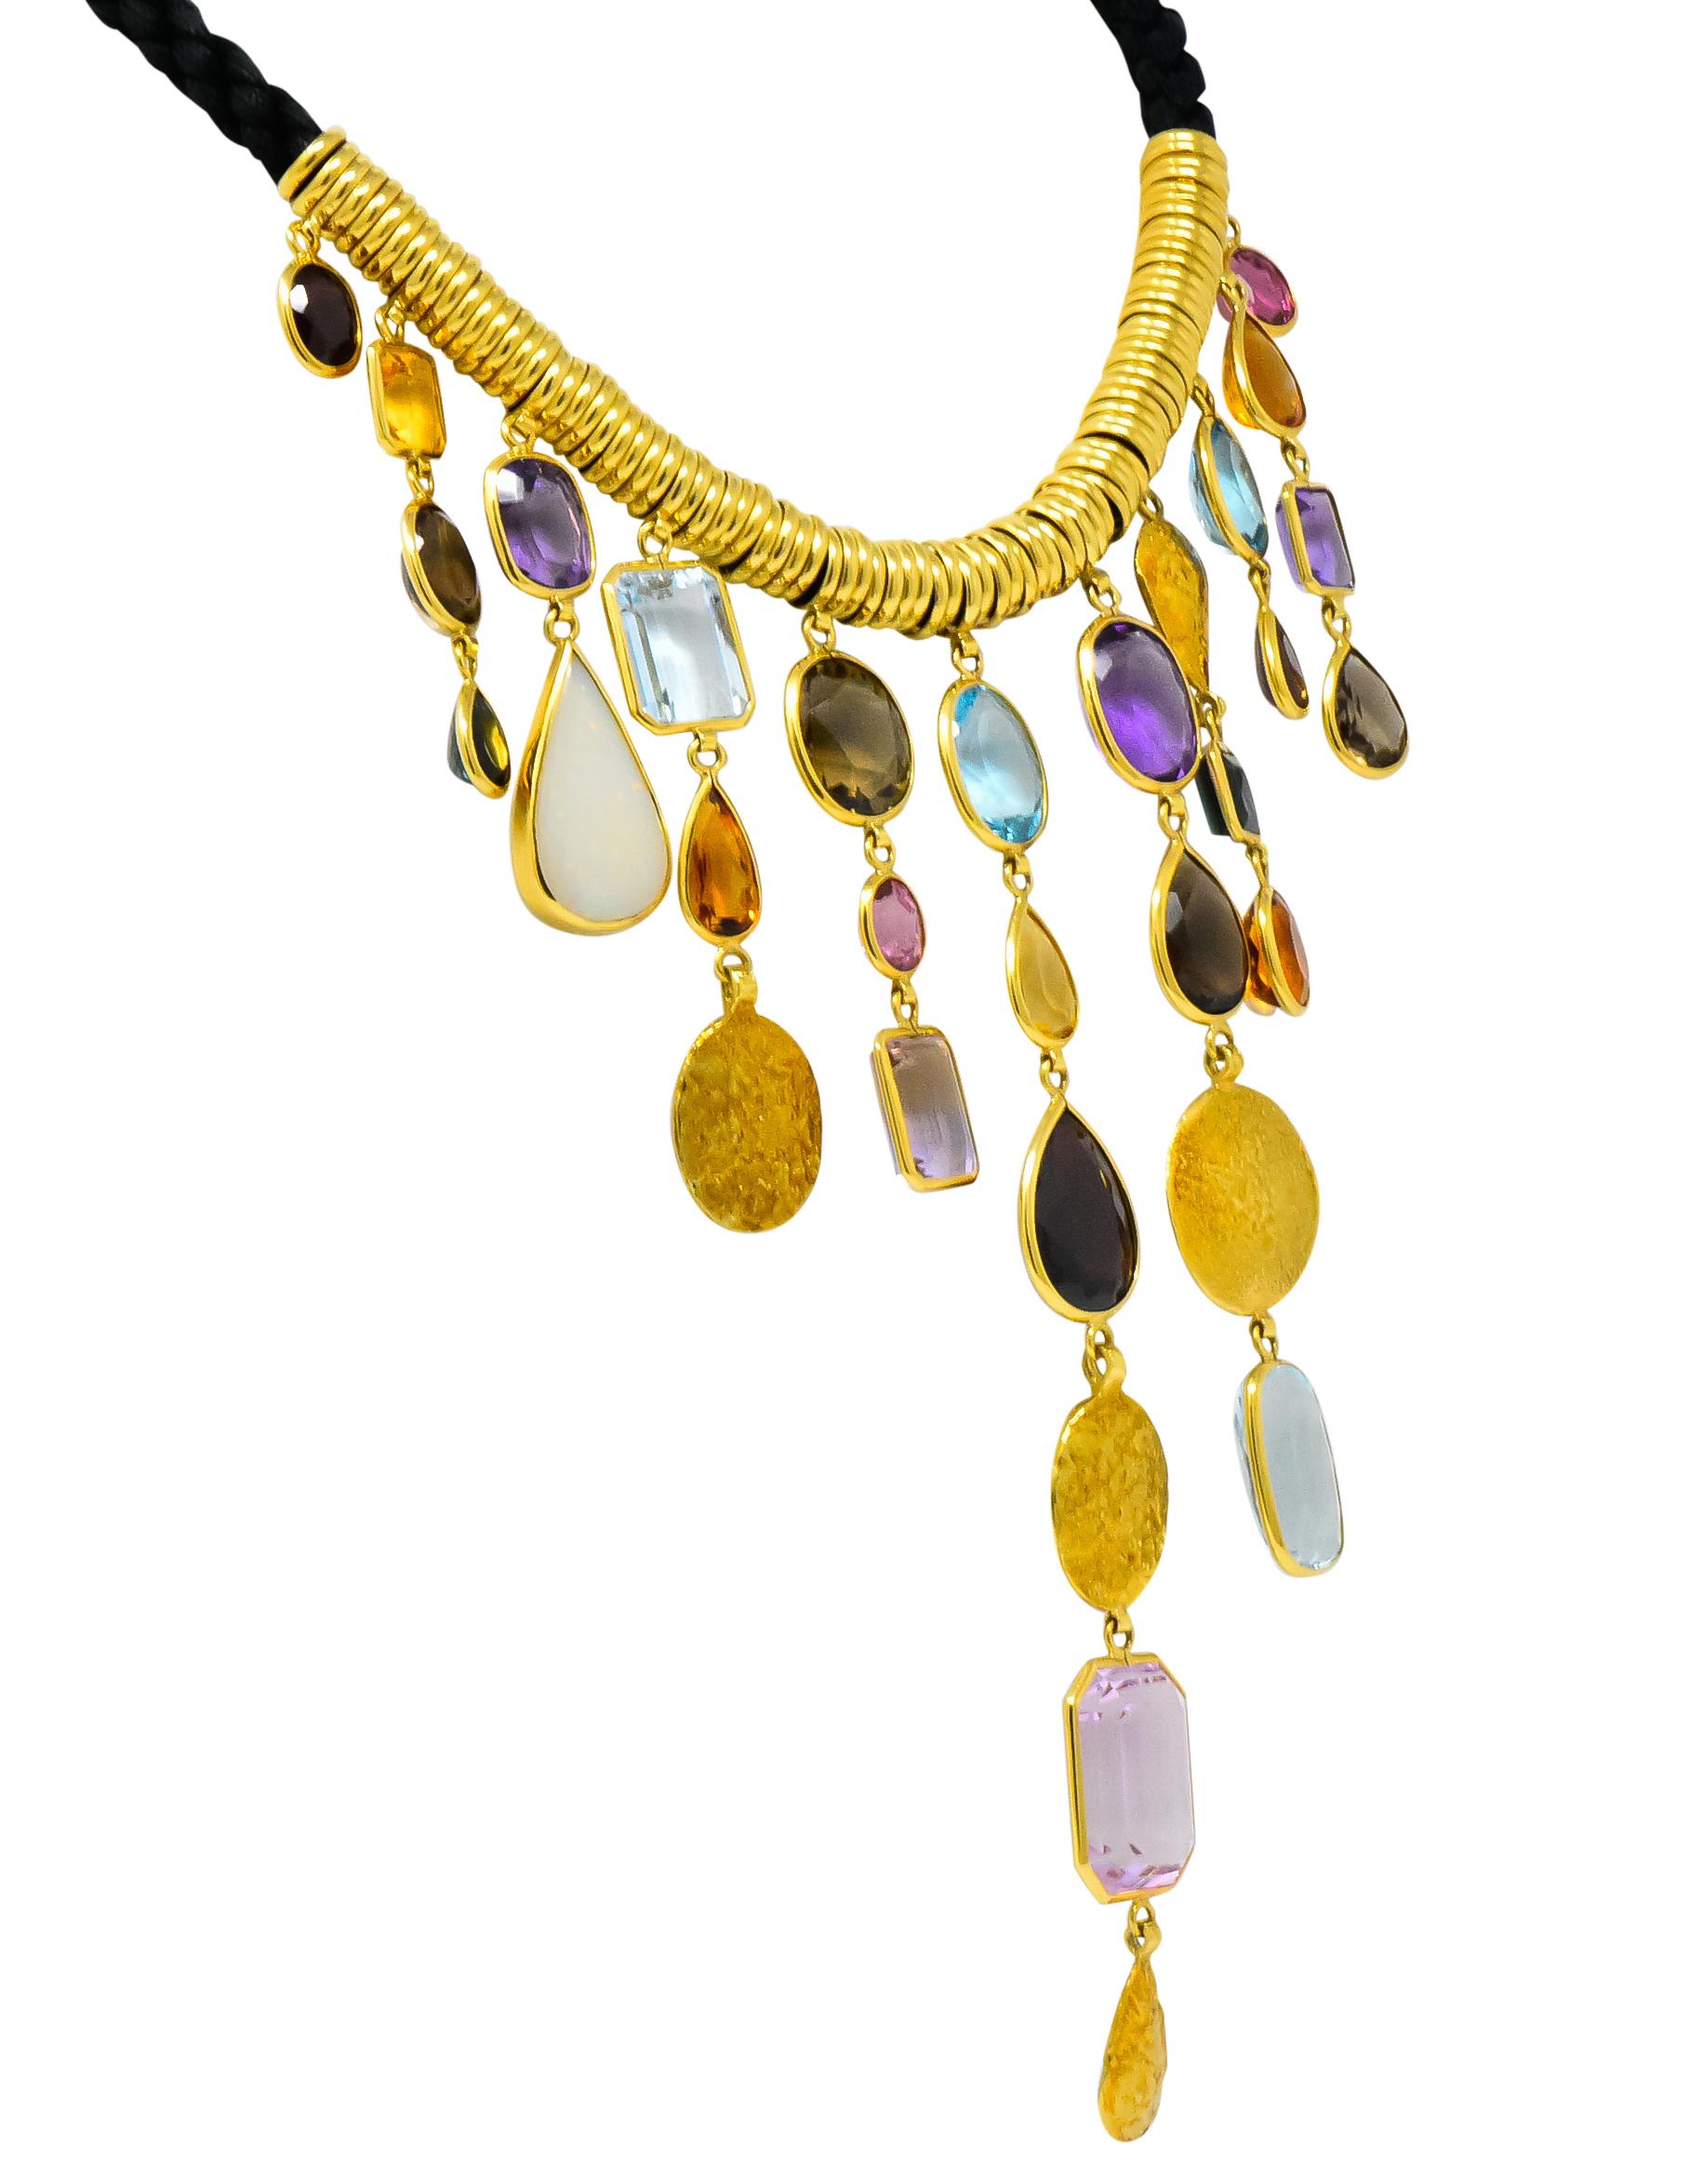 Designed as a woven cord necklace set to the front with gold roundels and eleven graduated drops

Drops are bezel set with various colored and shaped gemstones with textured gold accents

Featuring opal, garnet, citrine, amethyst, ametrine, smokey